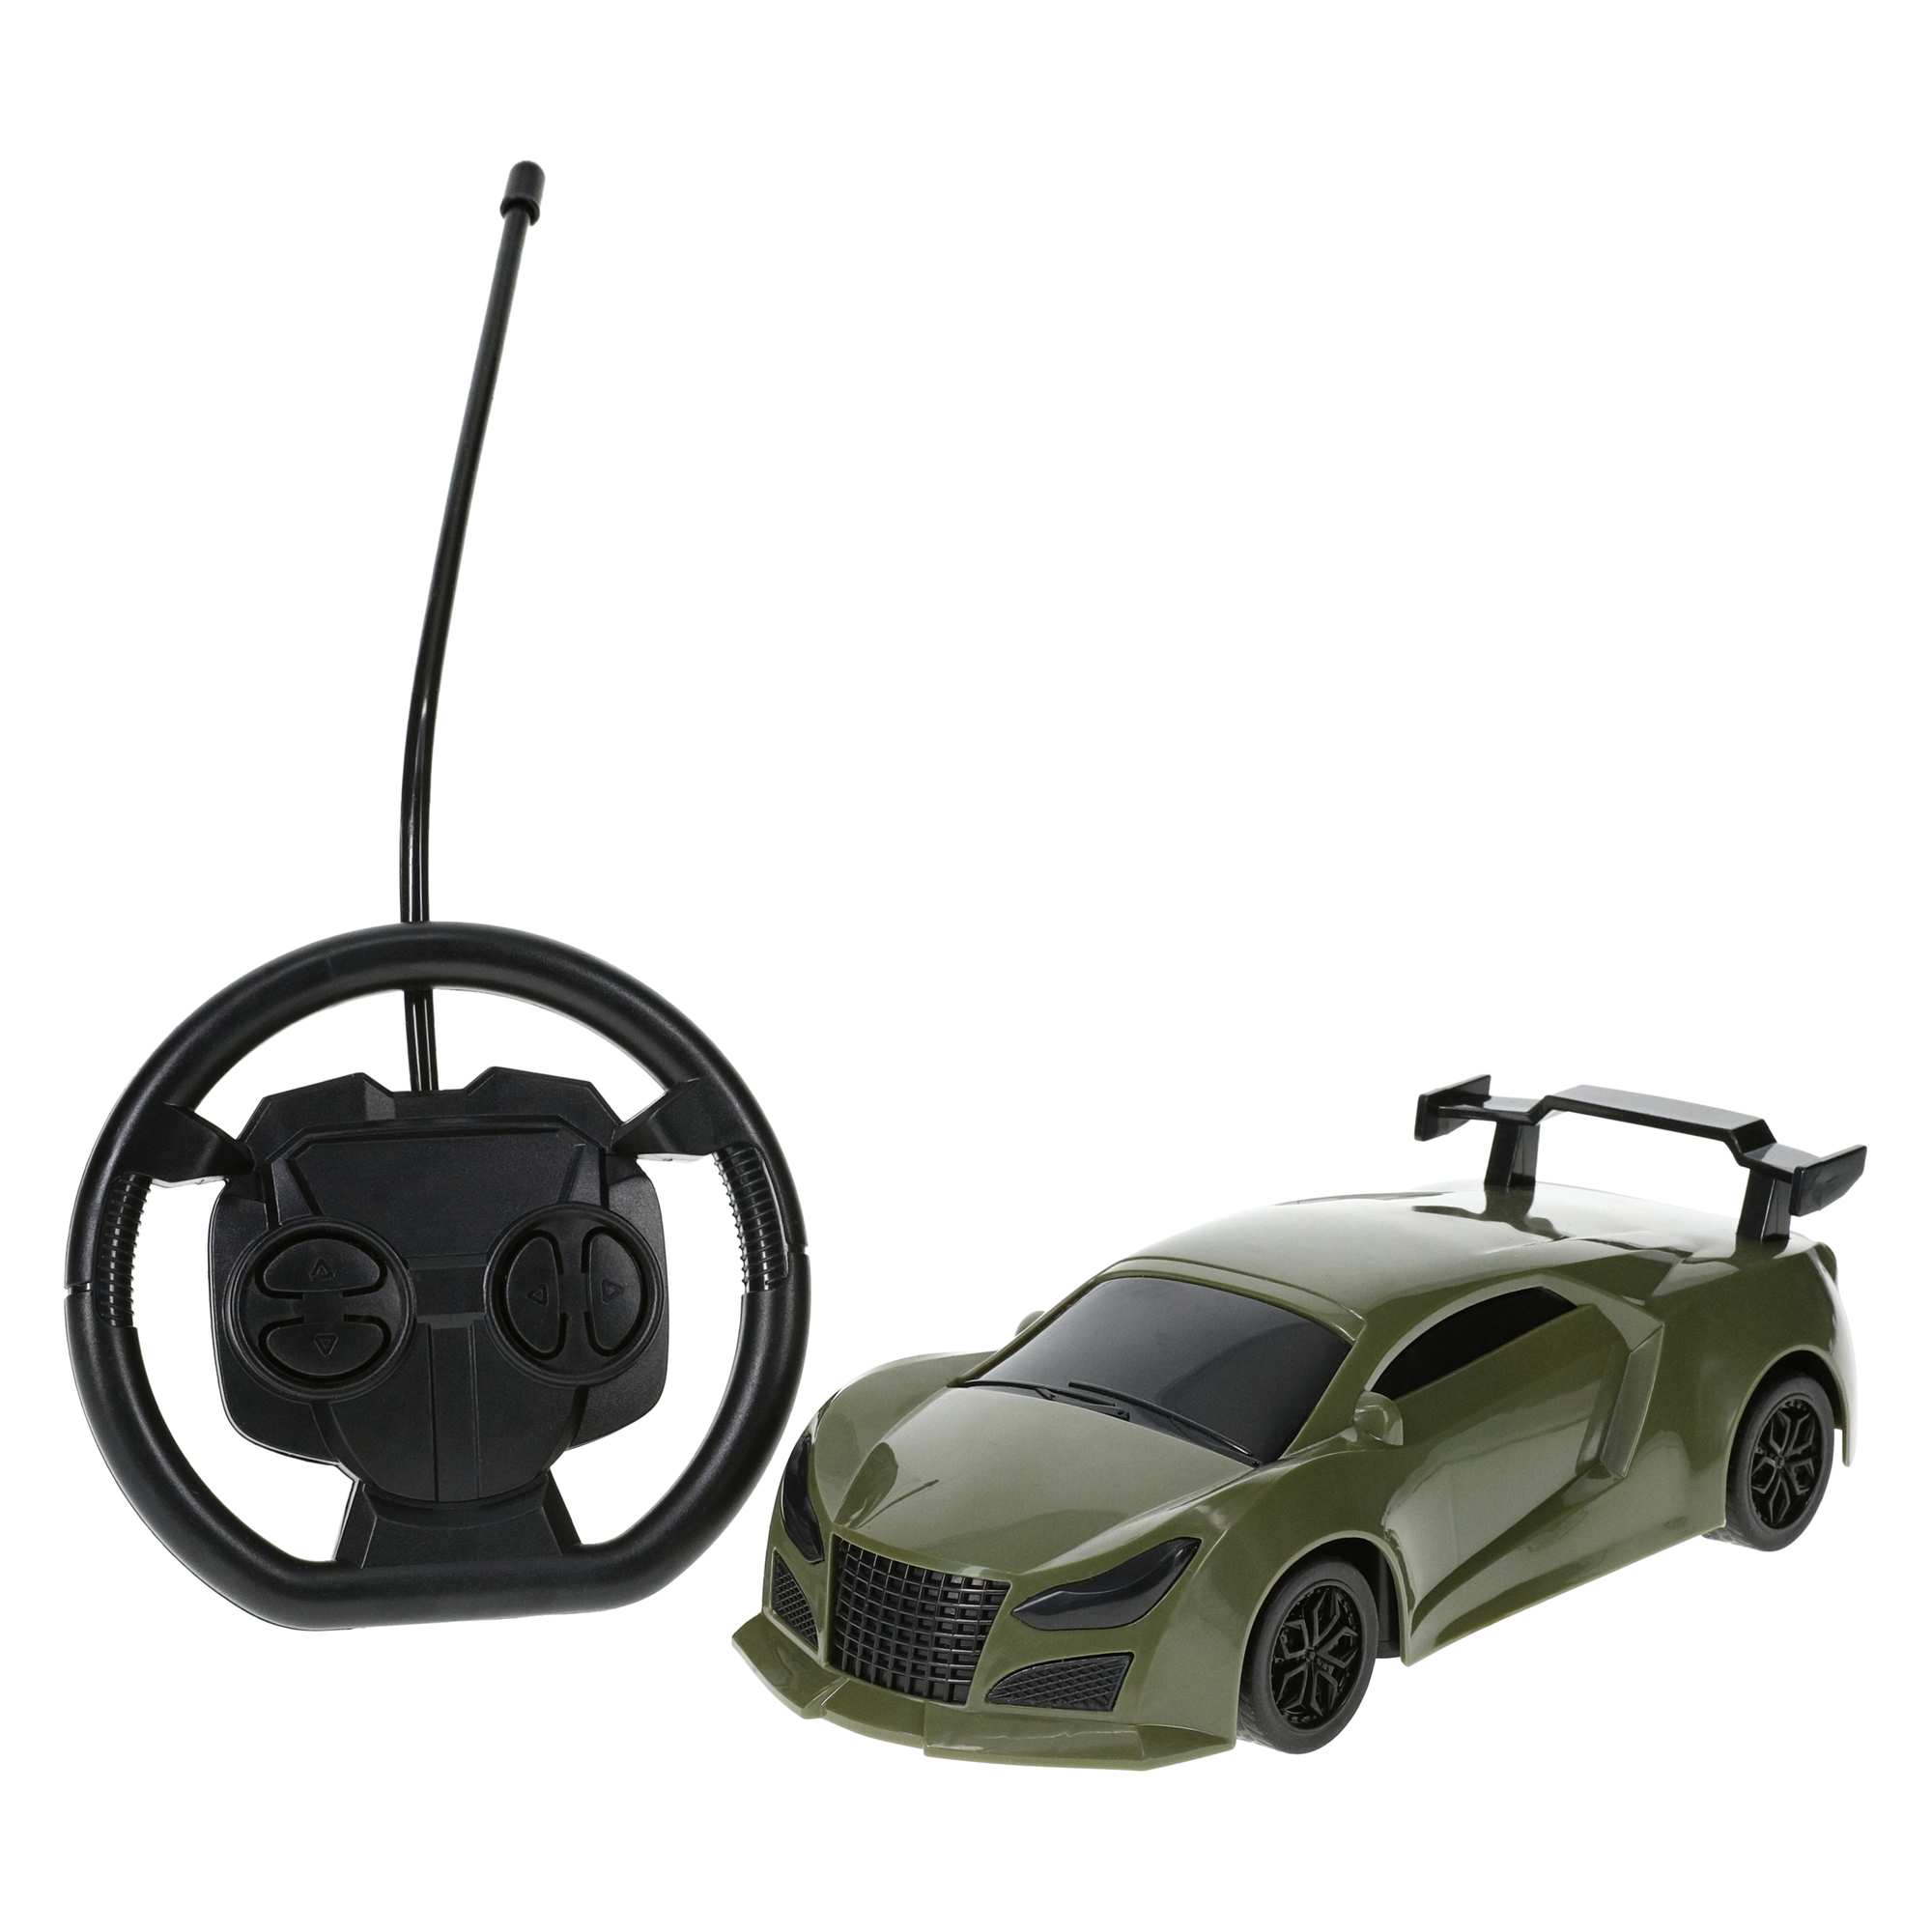 speed racing remote control car with wheel controller | Five Below